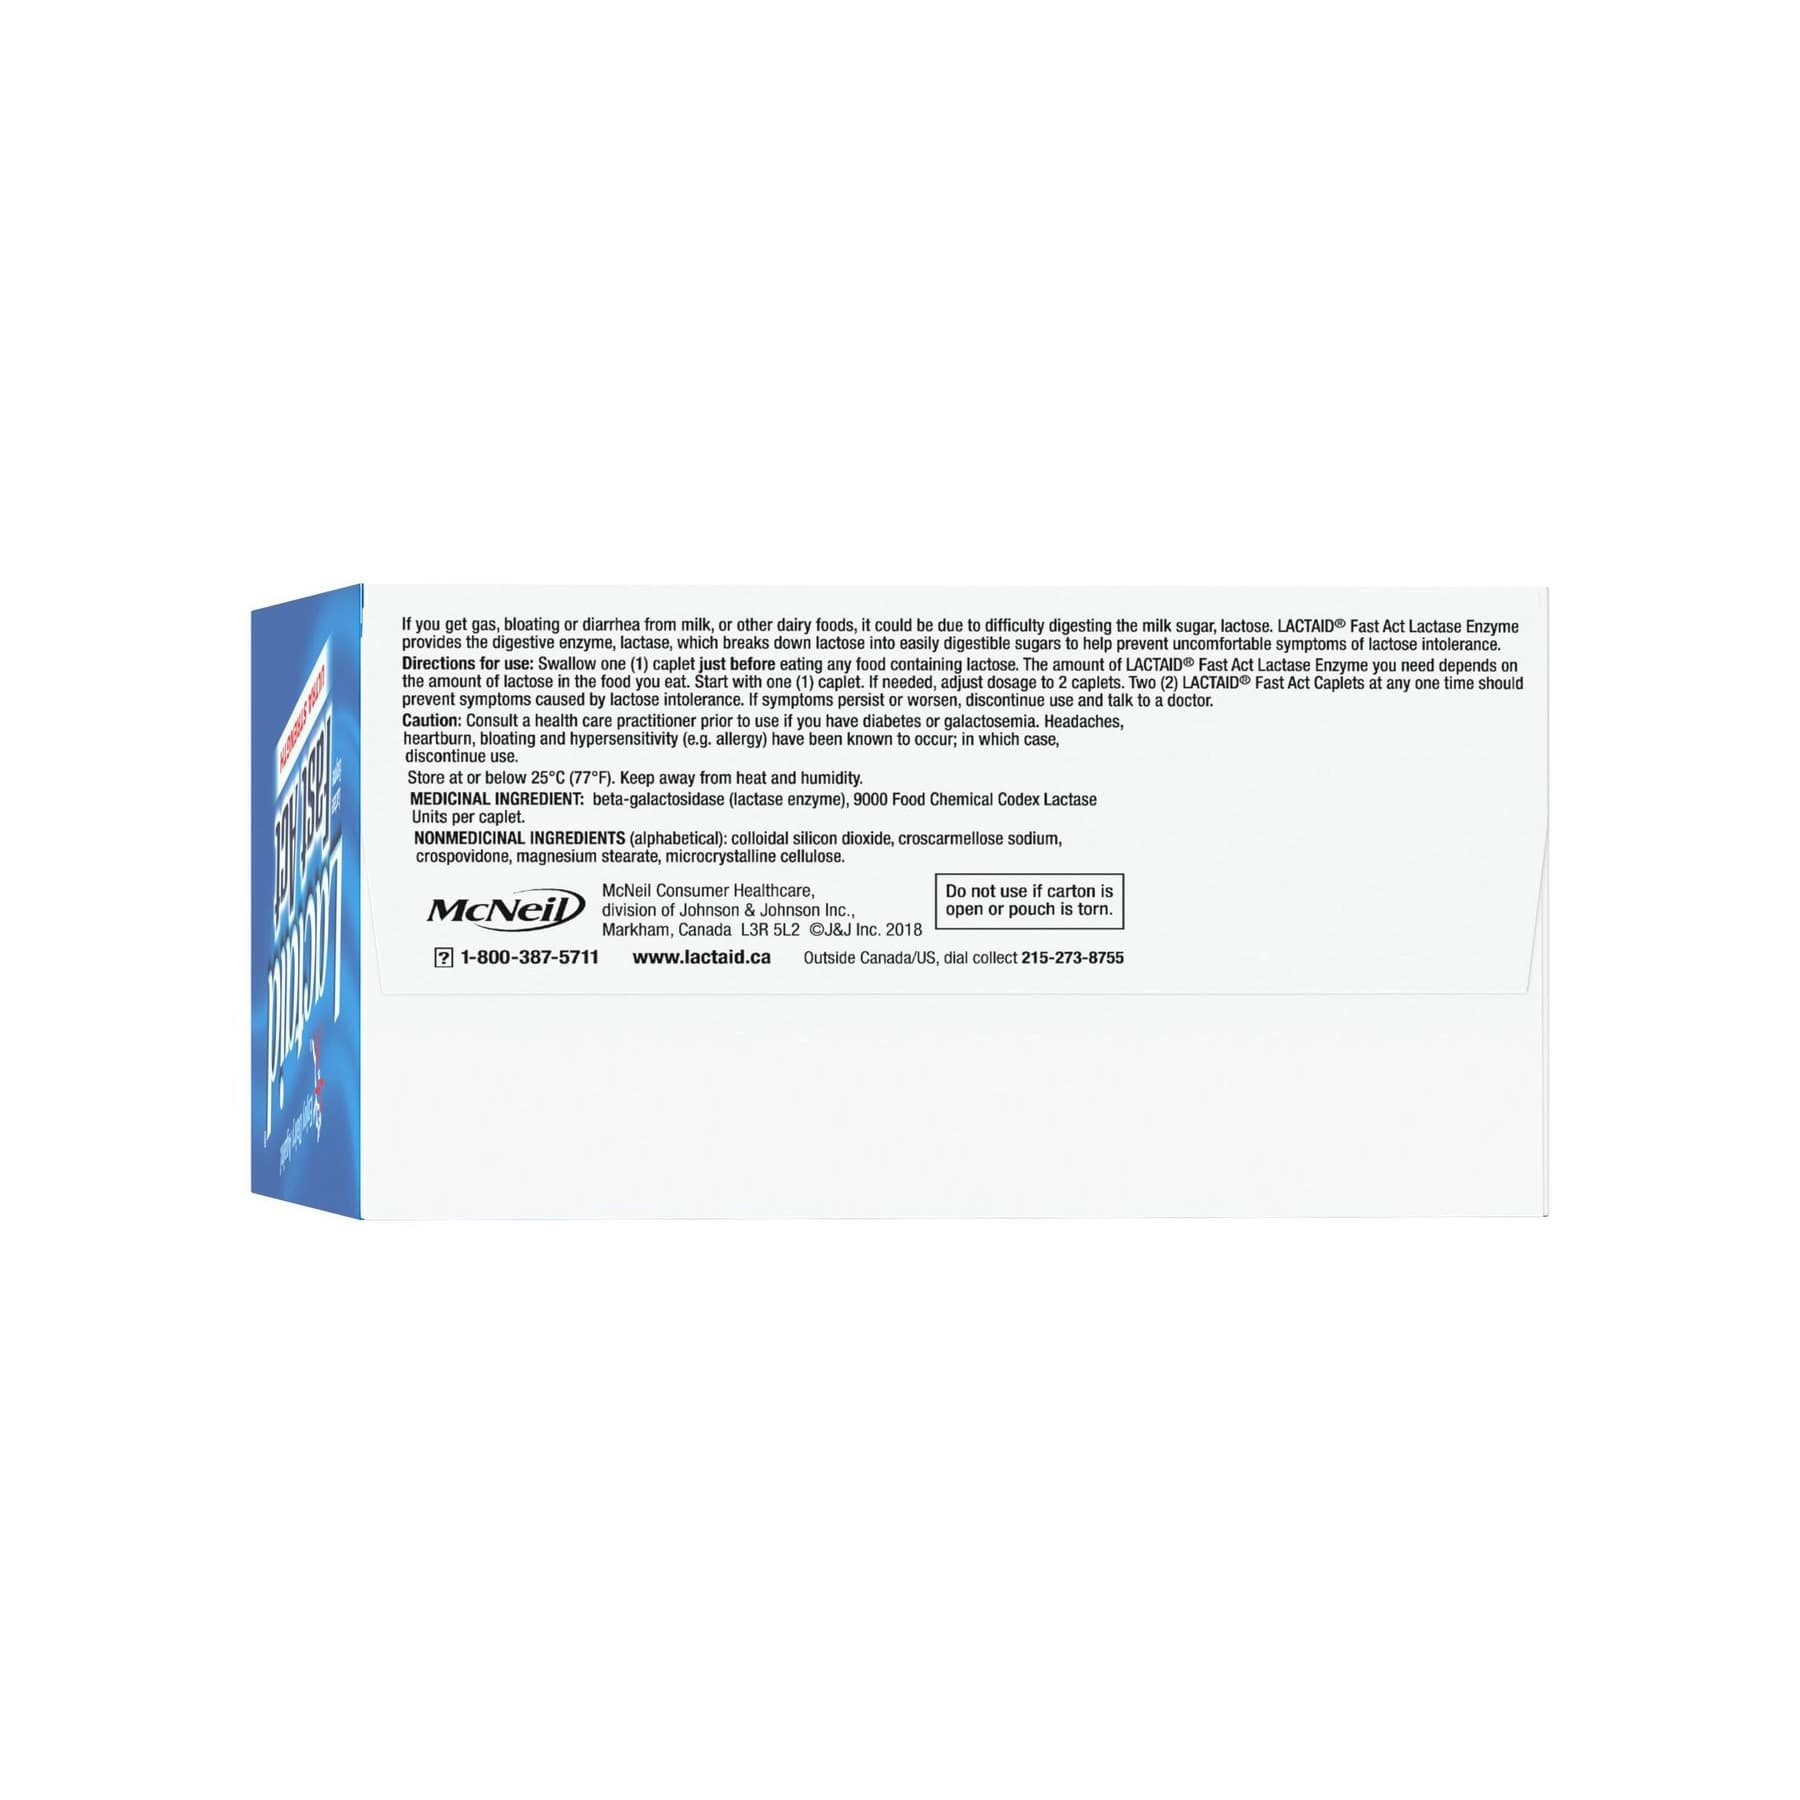 Description, directions, caution, ingredients for Lactaid Ultra Strength Fast Act Lactase Enzyme Caplets (40 caplets) in English